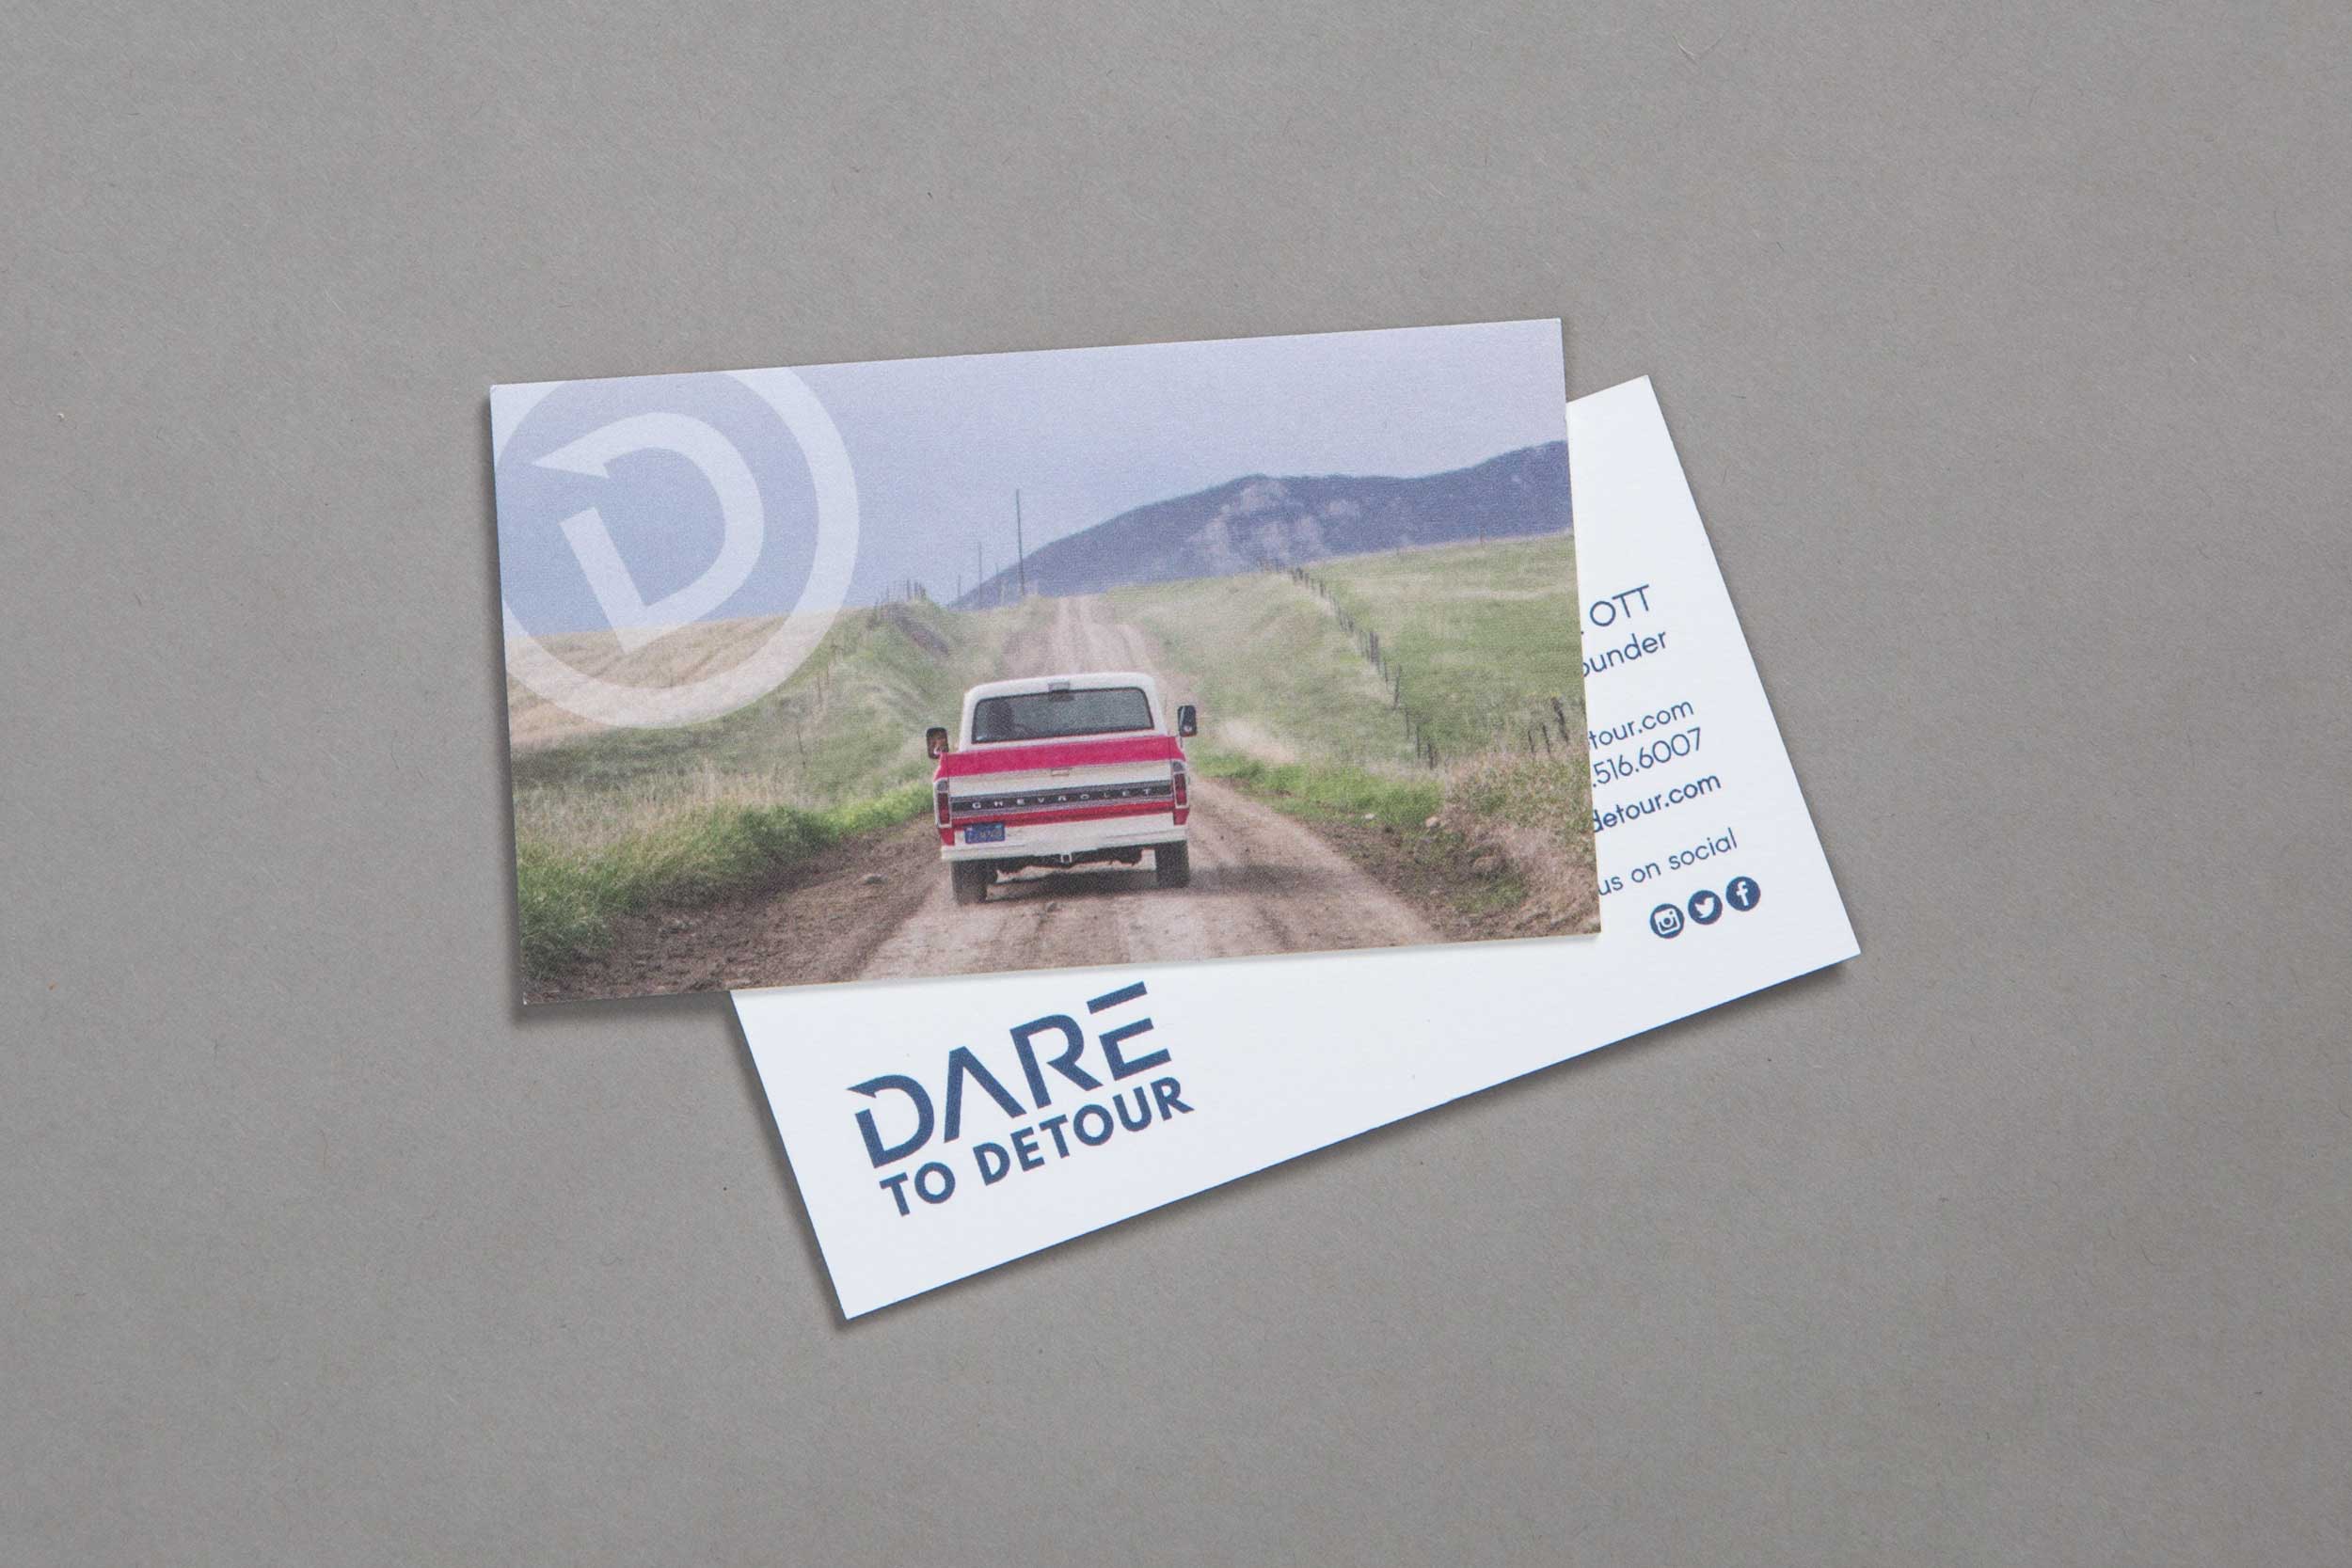 Business cards that represent Dare to Detour identity.